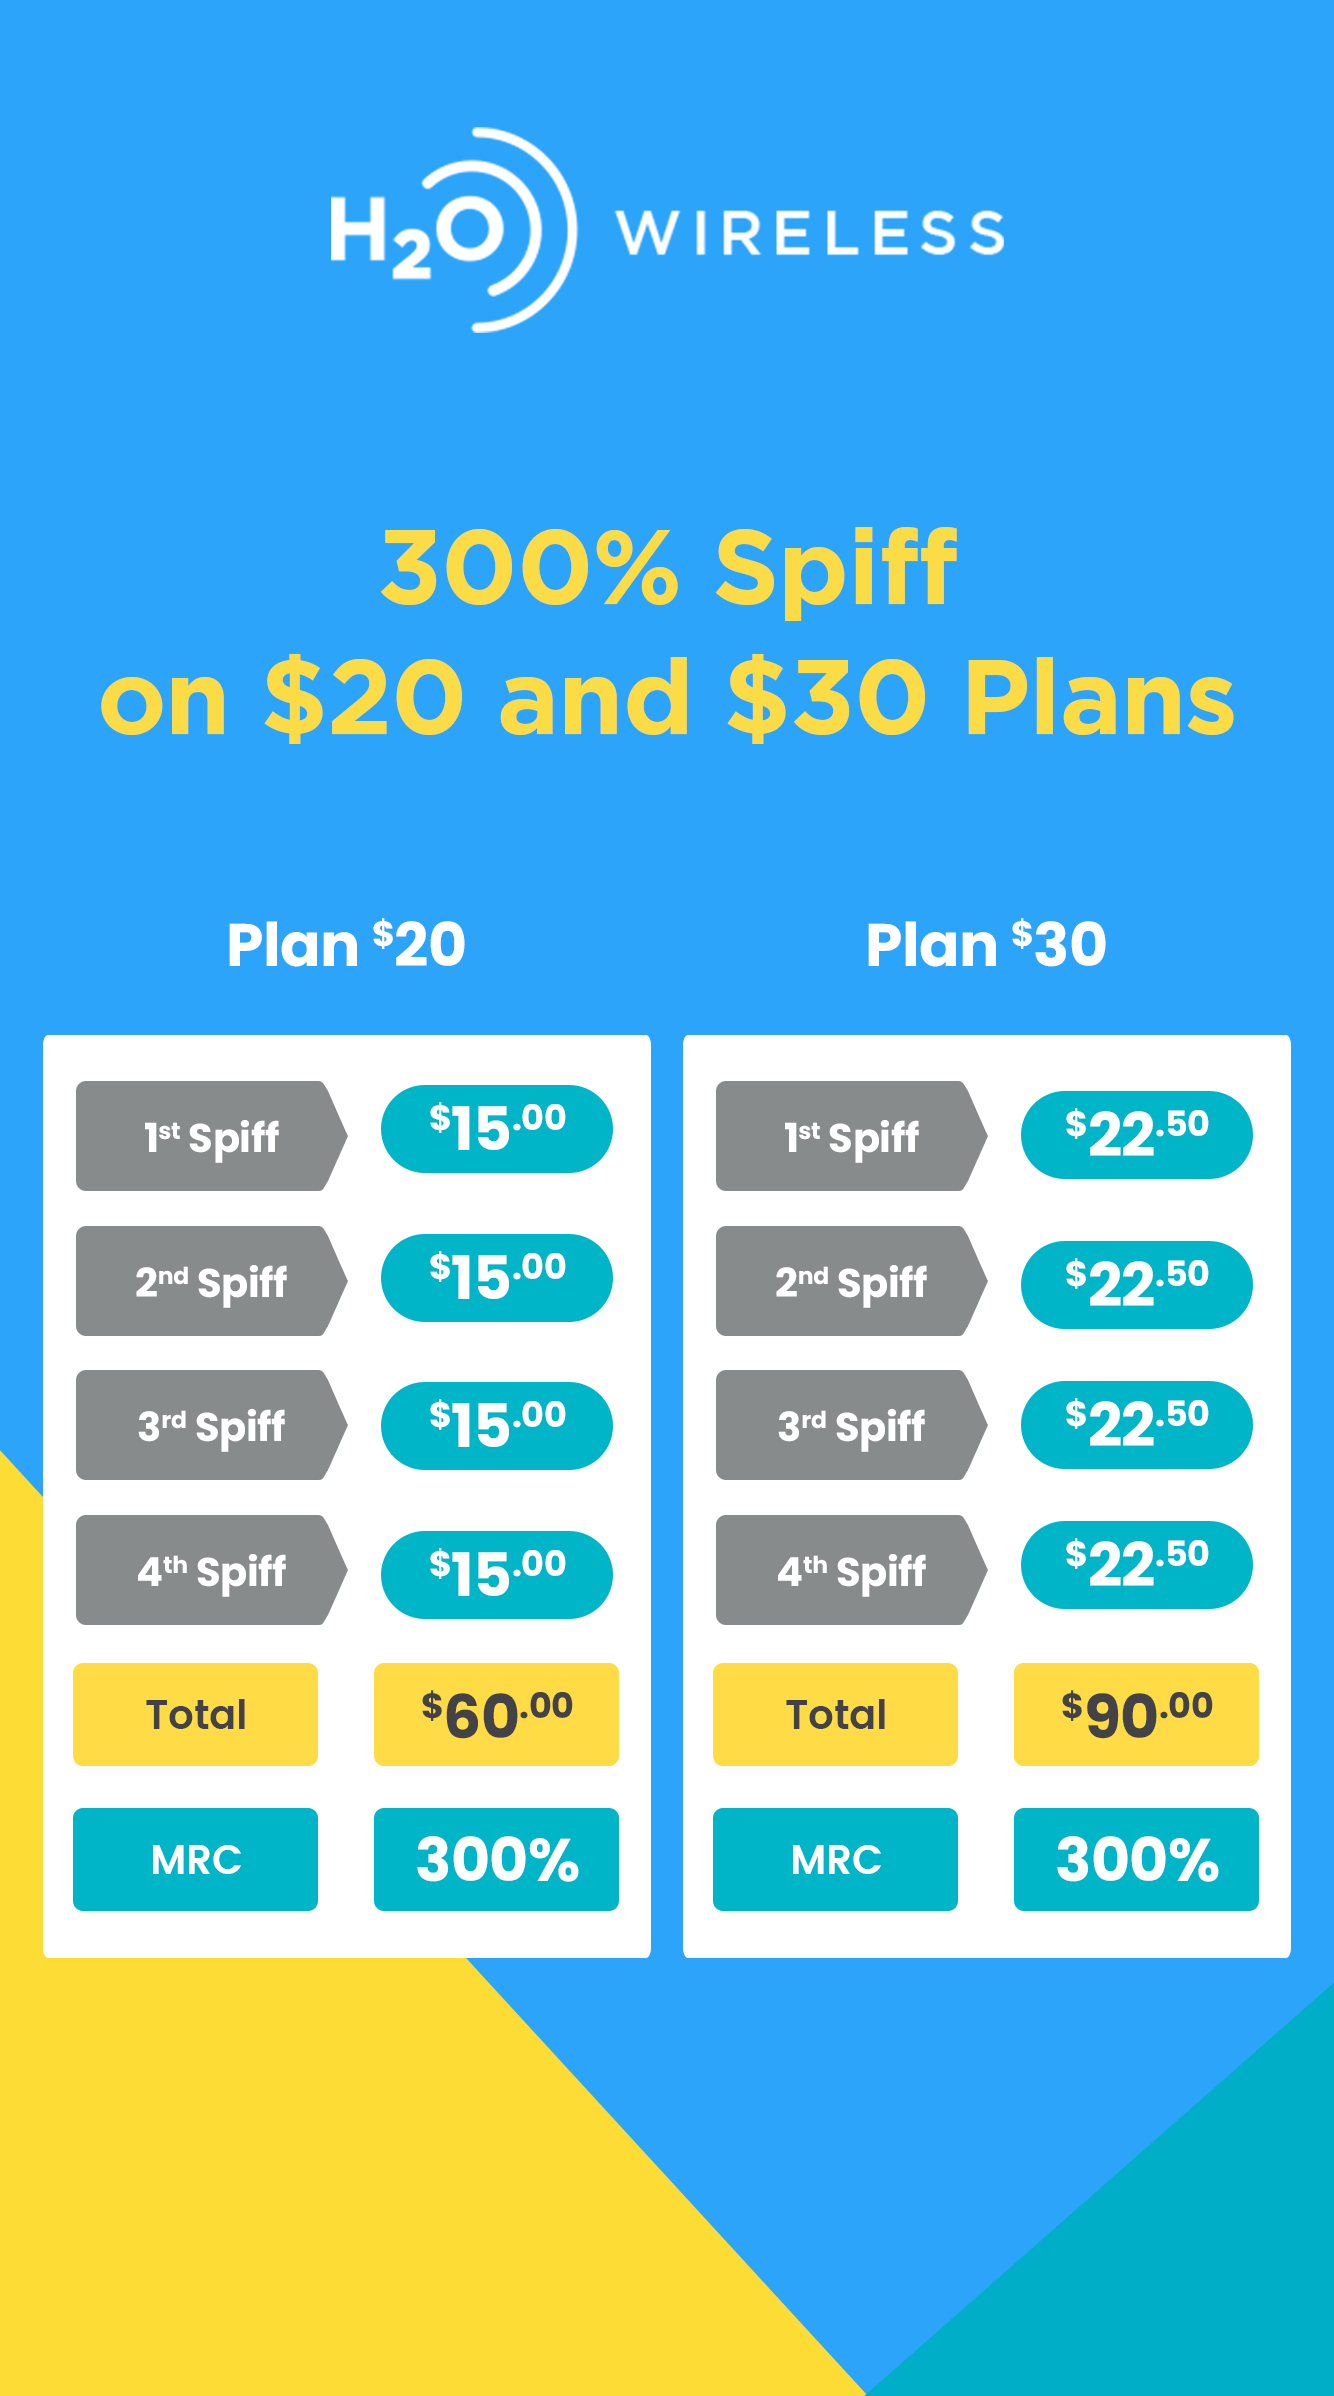 h2o, prepaid, new $50 LTE unlimited more data plan earn up to 200% spiff - new h2o plan, up front commissions, RTR Discount, keep activation fee. New Spiff + RTR Discount - Simapay h2o number 1 master agent - Prepaid wholesale